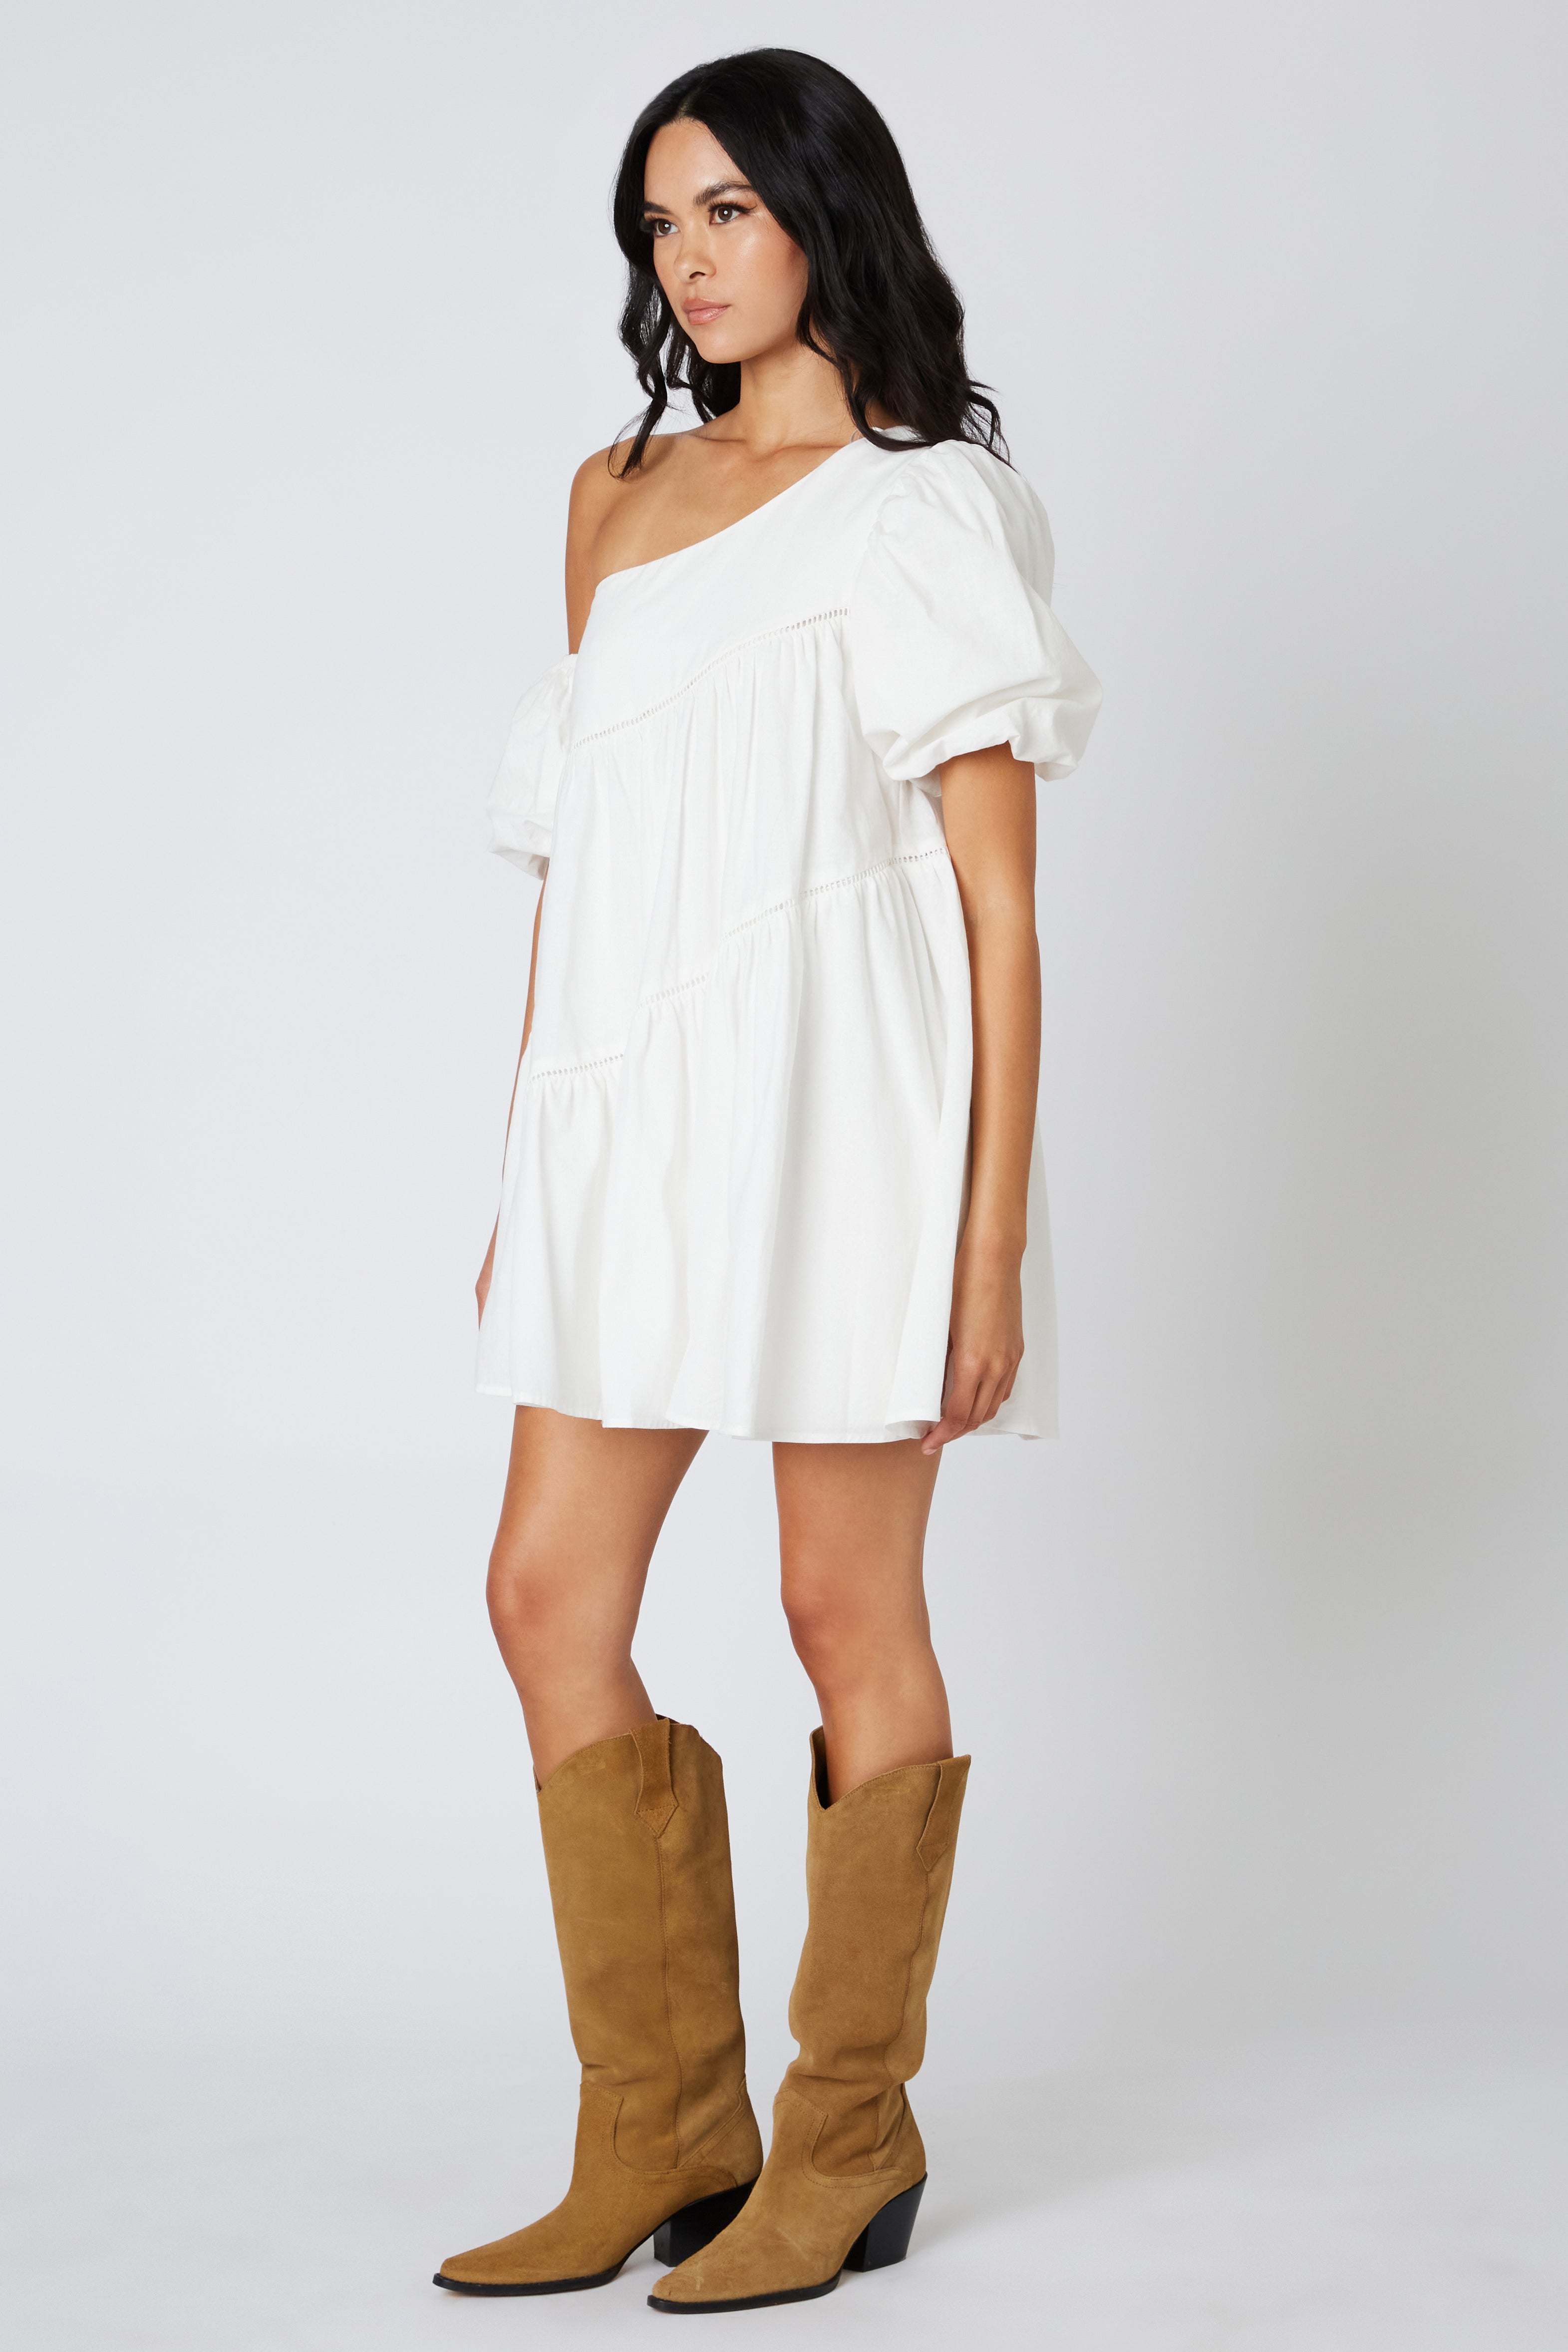 Cold Shoulder Trapeze Dress in White Side View